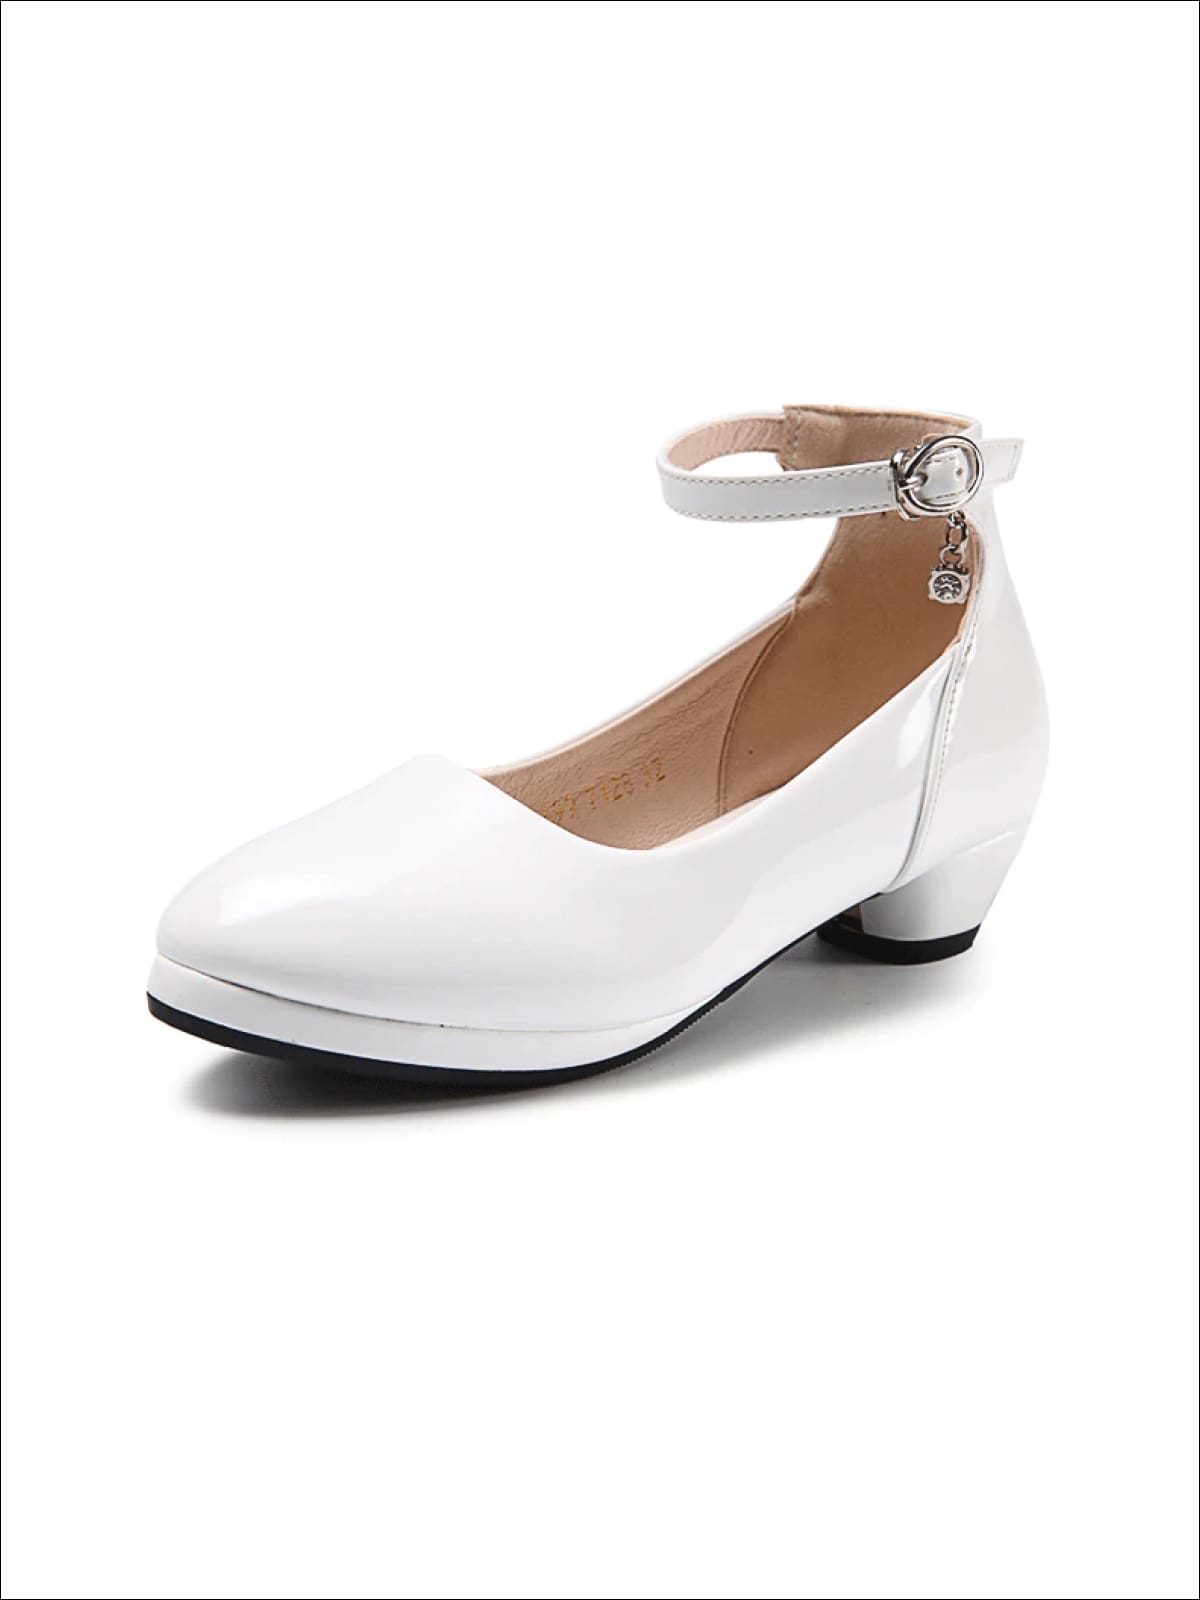 Girls Patent Synthetic Leather Ankle Strap Dress Up Shoes - White / 8 - Girls Flats